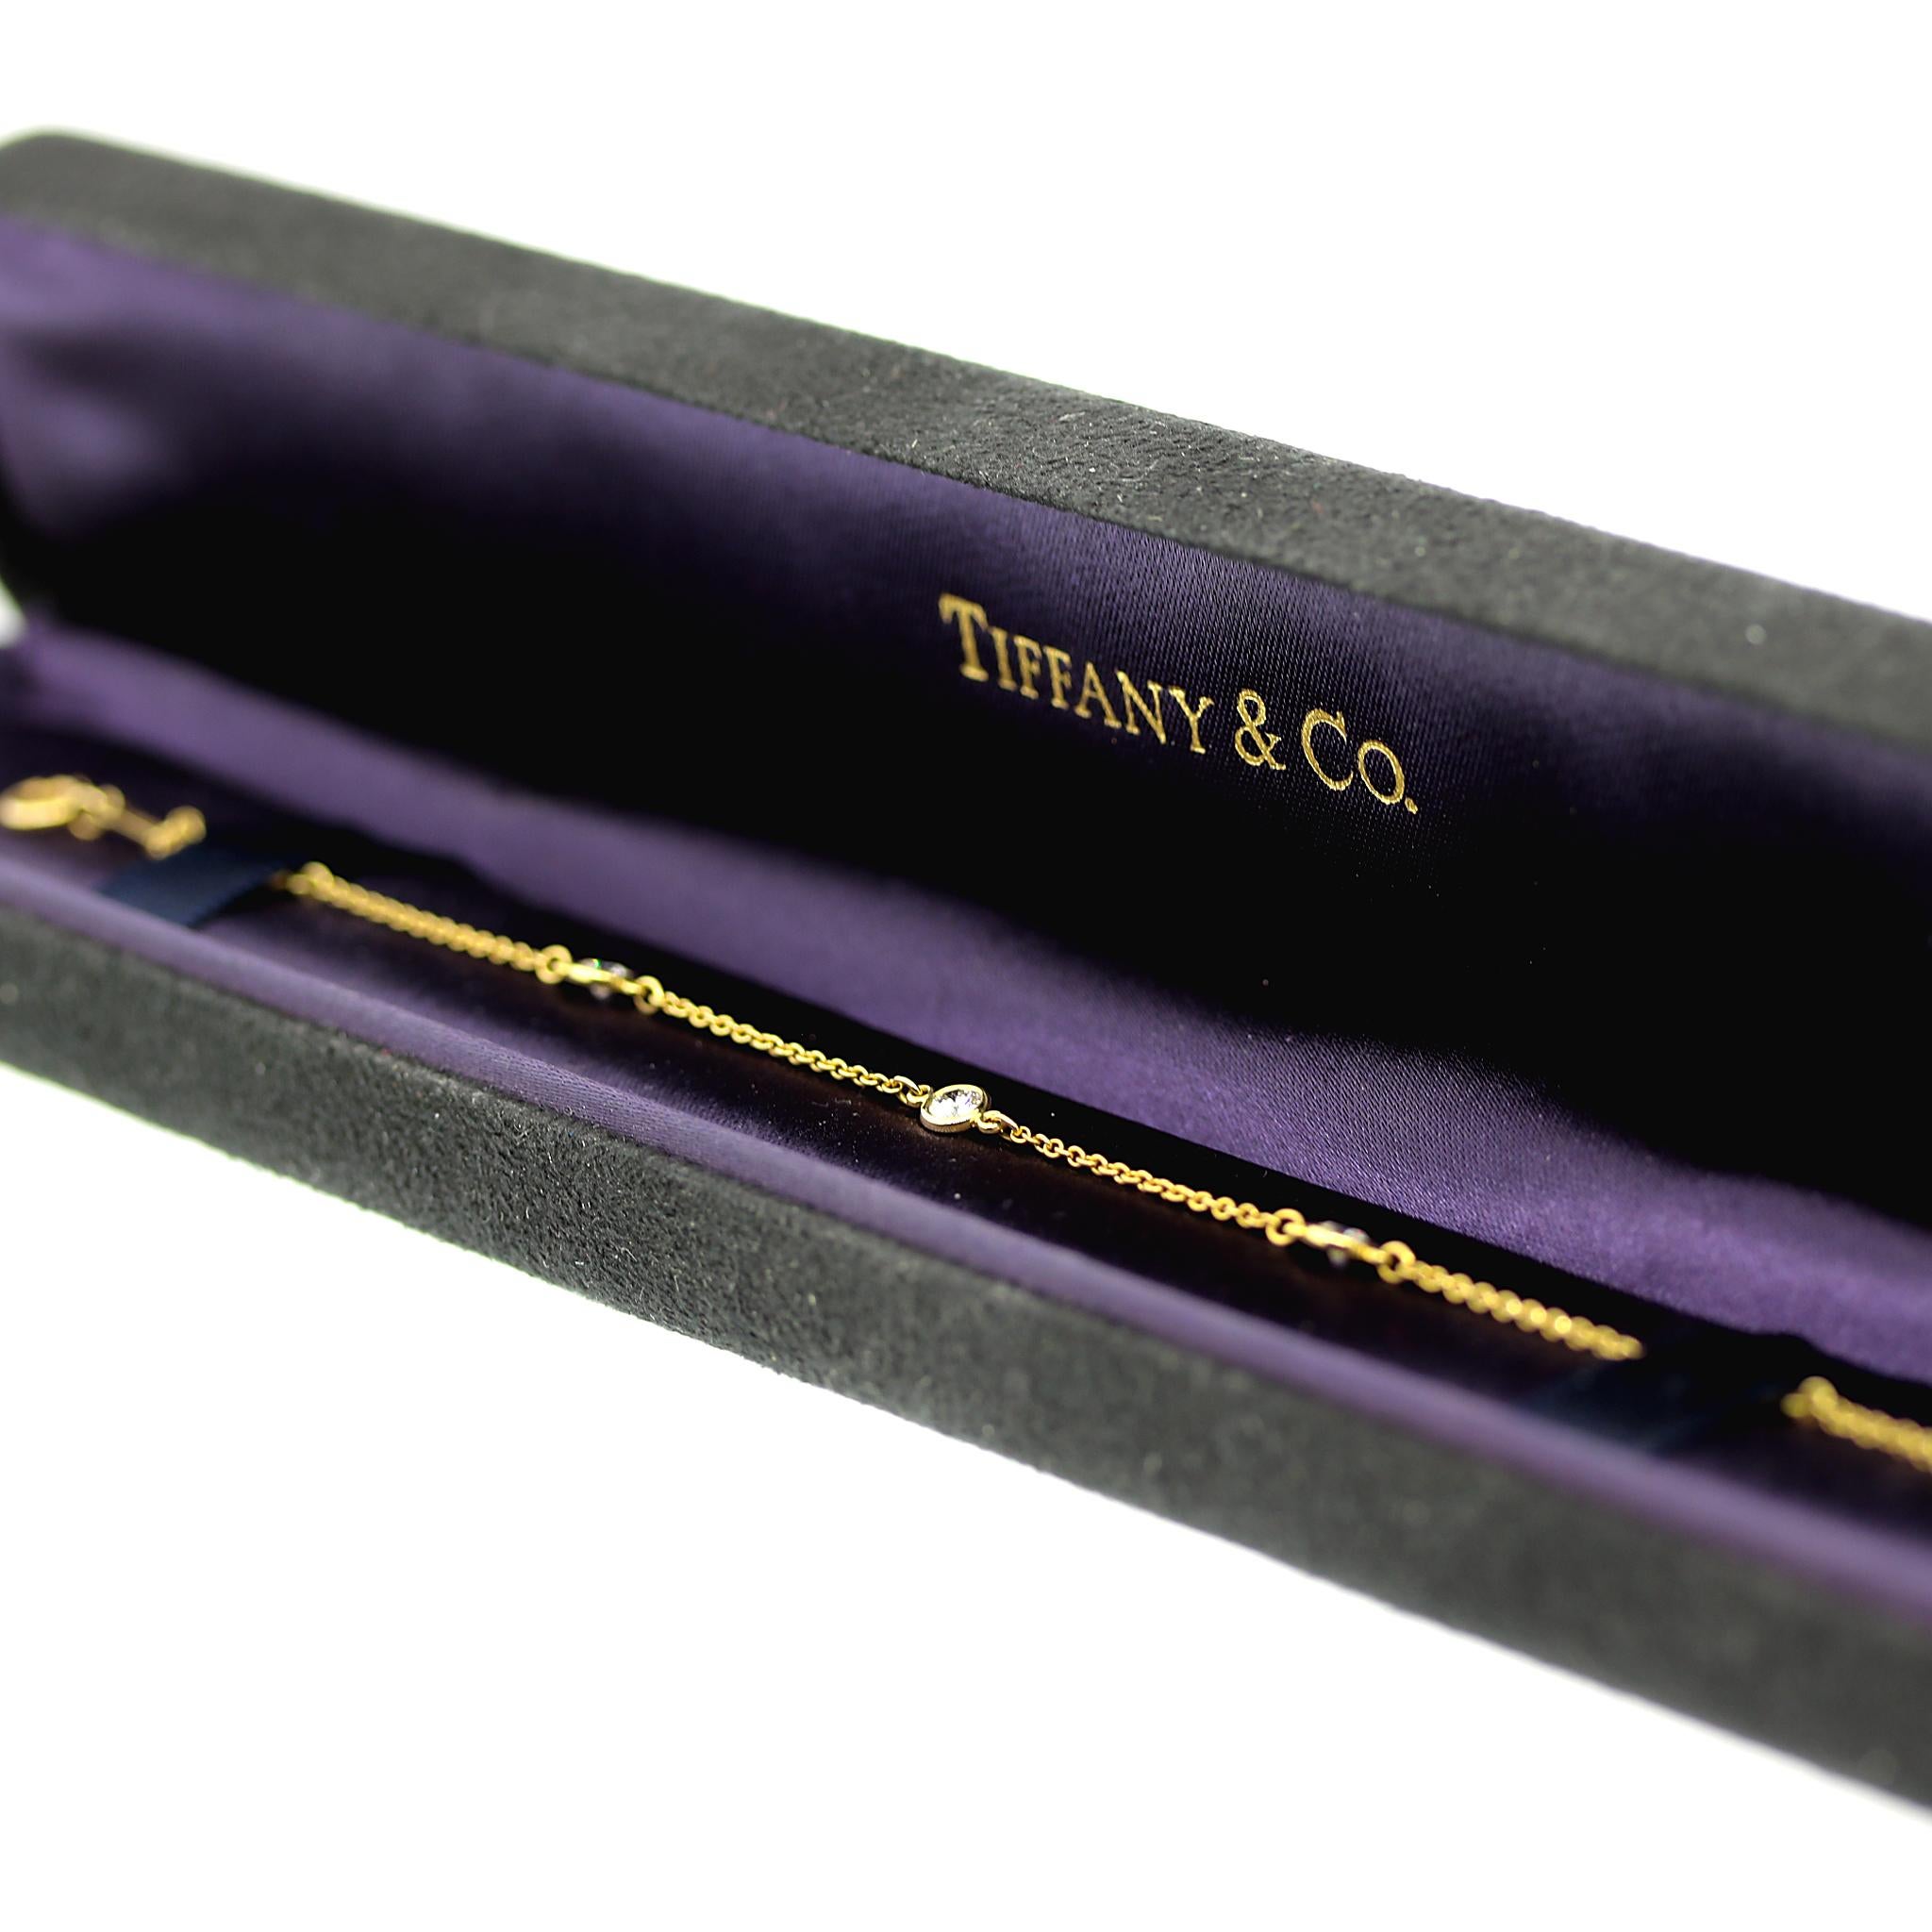 18 kt Yellow Gold
Length: 6.5 inches
Diamond: 0.30 ct twd
It comes with the original Tiffany and Co. Bracelet Box
